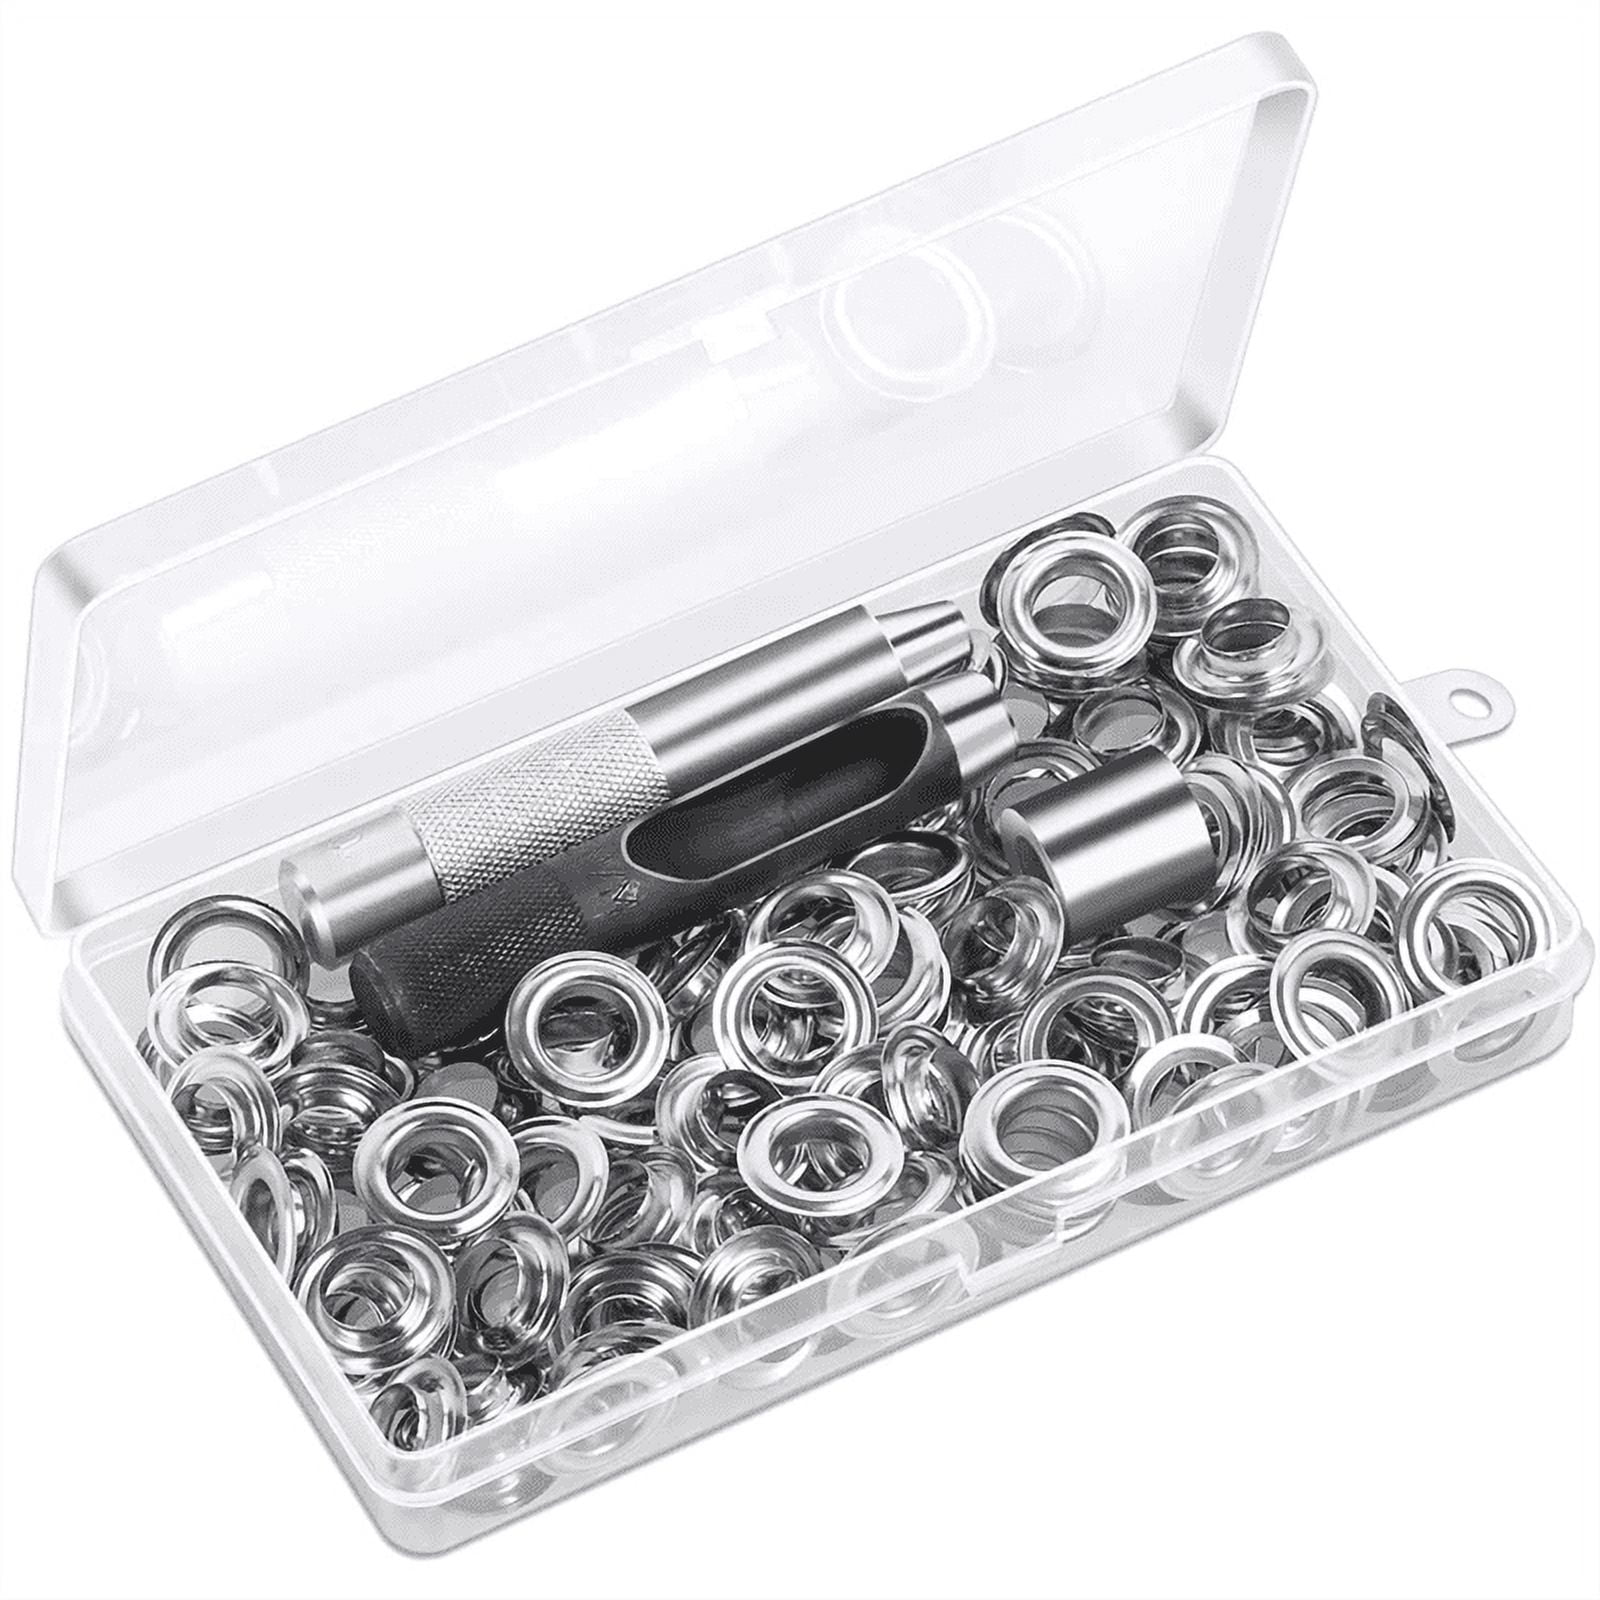 120 Sets Grommet Eyelets Tool Kit, Grommet Kit 1/2 Inch Eyelets with Tools  and Storage Box Silver 